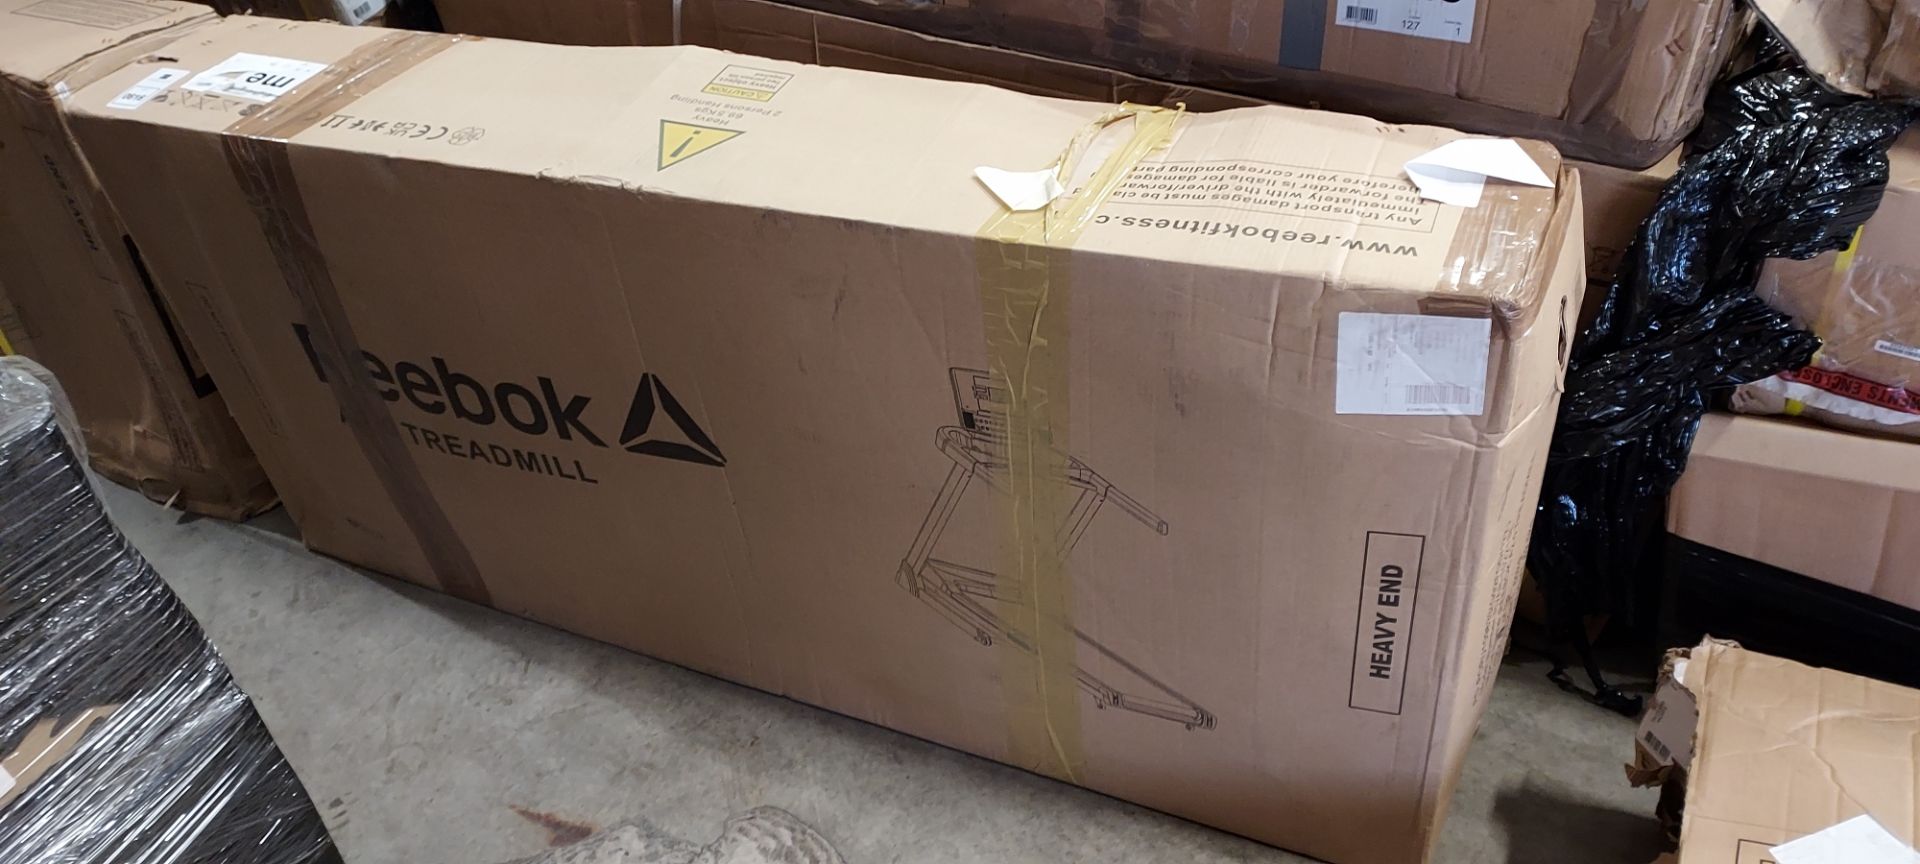 1 X IN BOX REEBOK A2 TREADMILL 00 IN SILVER GROSS WEIGHT 60KG (NOTE BOX DAMAGED & RETAPED) - Image 2 of 2